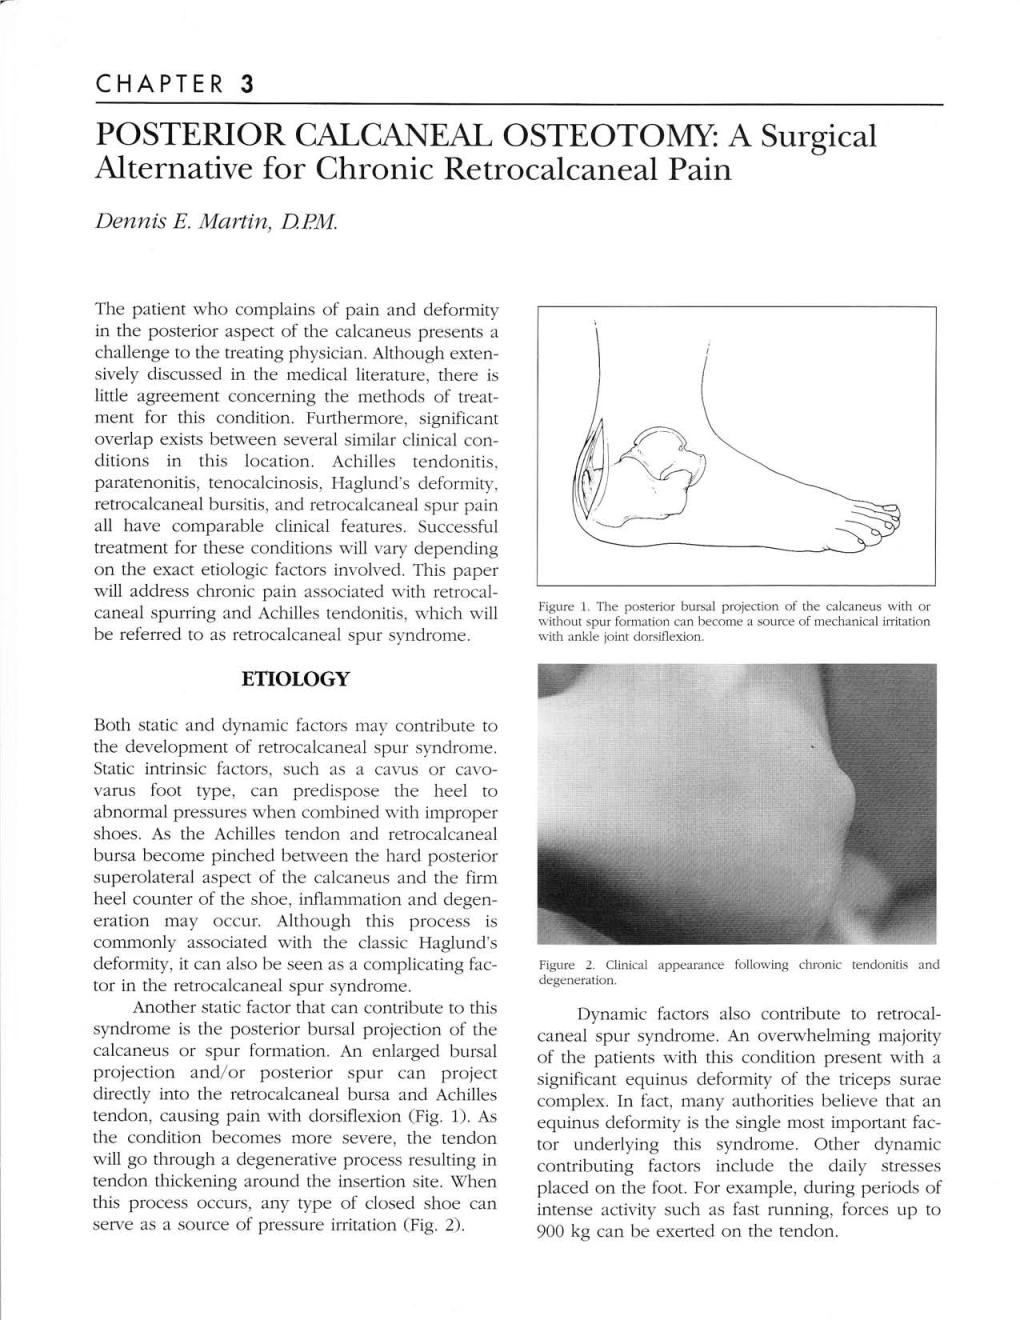 POSTERIOR CALCANEAL OSTEOTOMY: a Surgical Alternative for Chronic Retrocalcaneal Pain